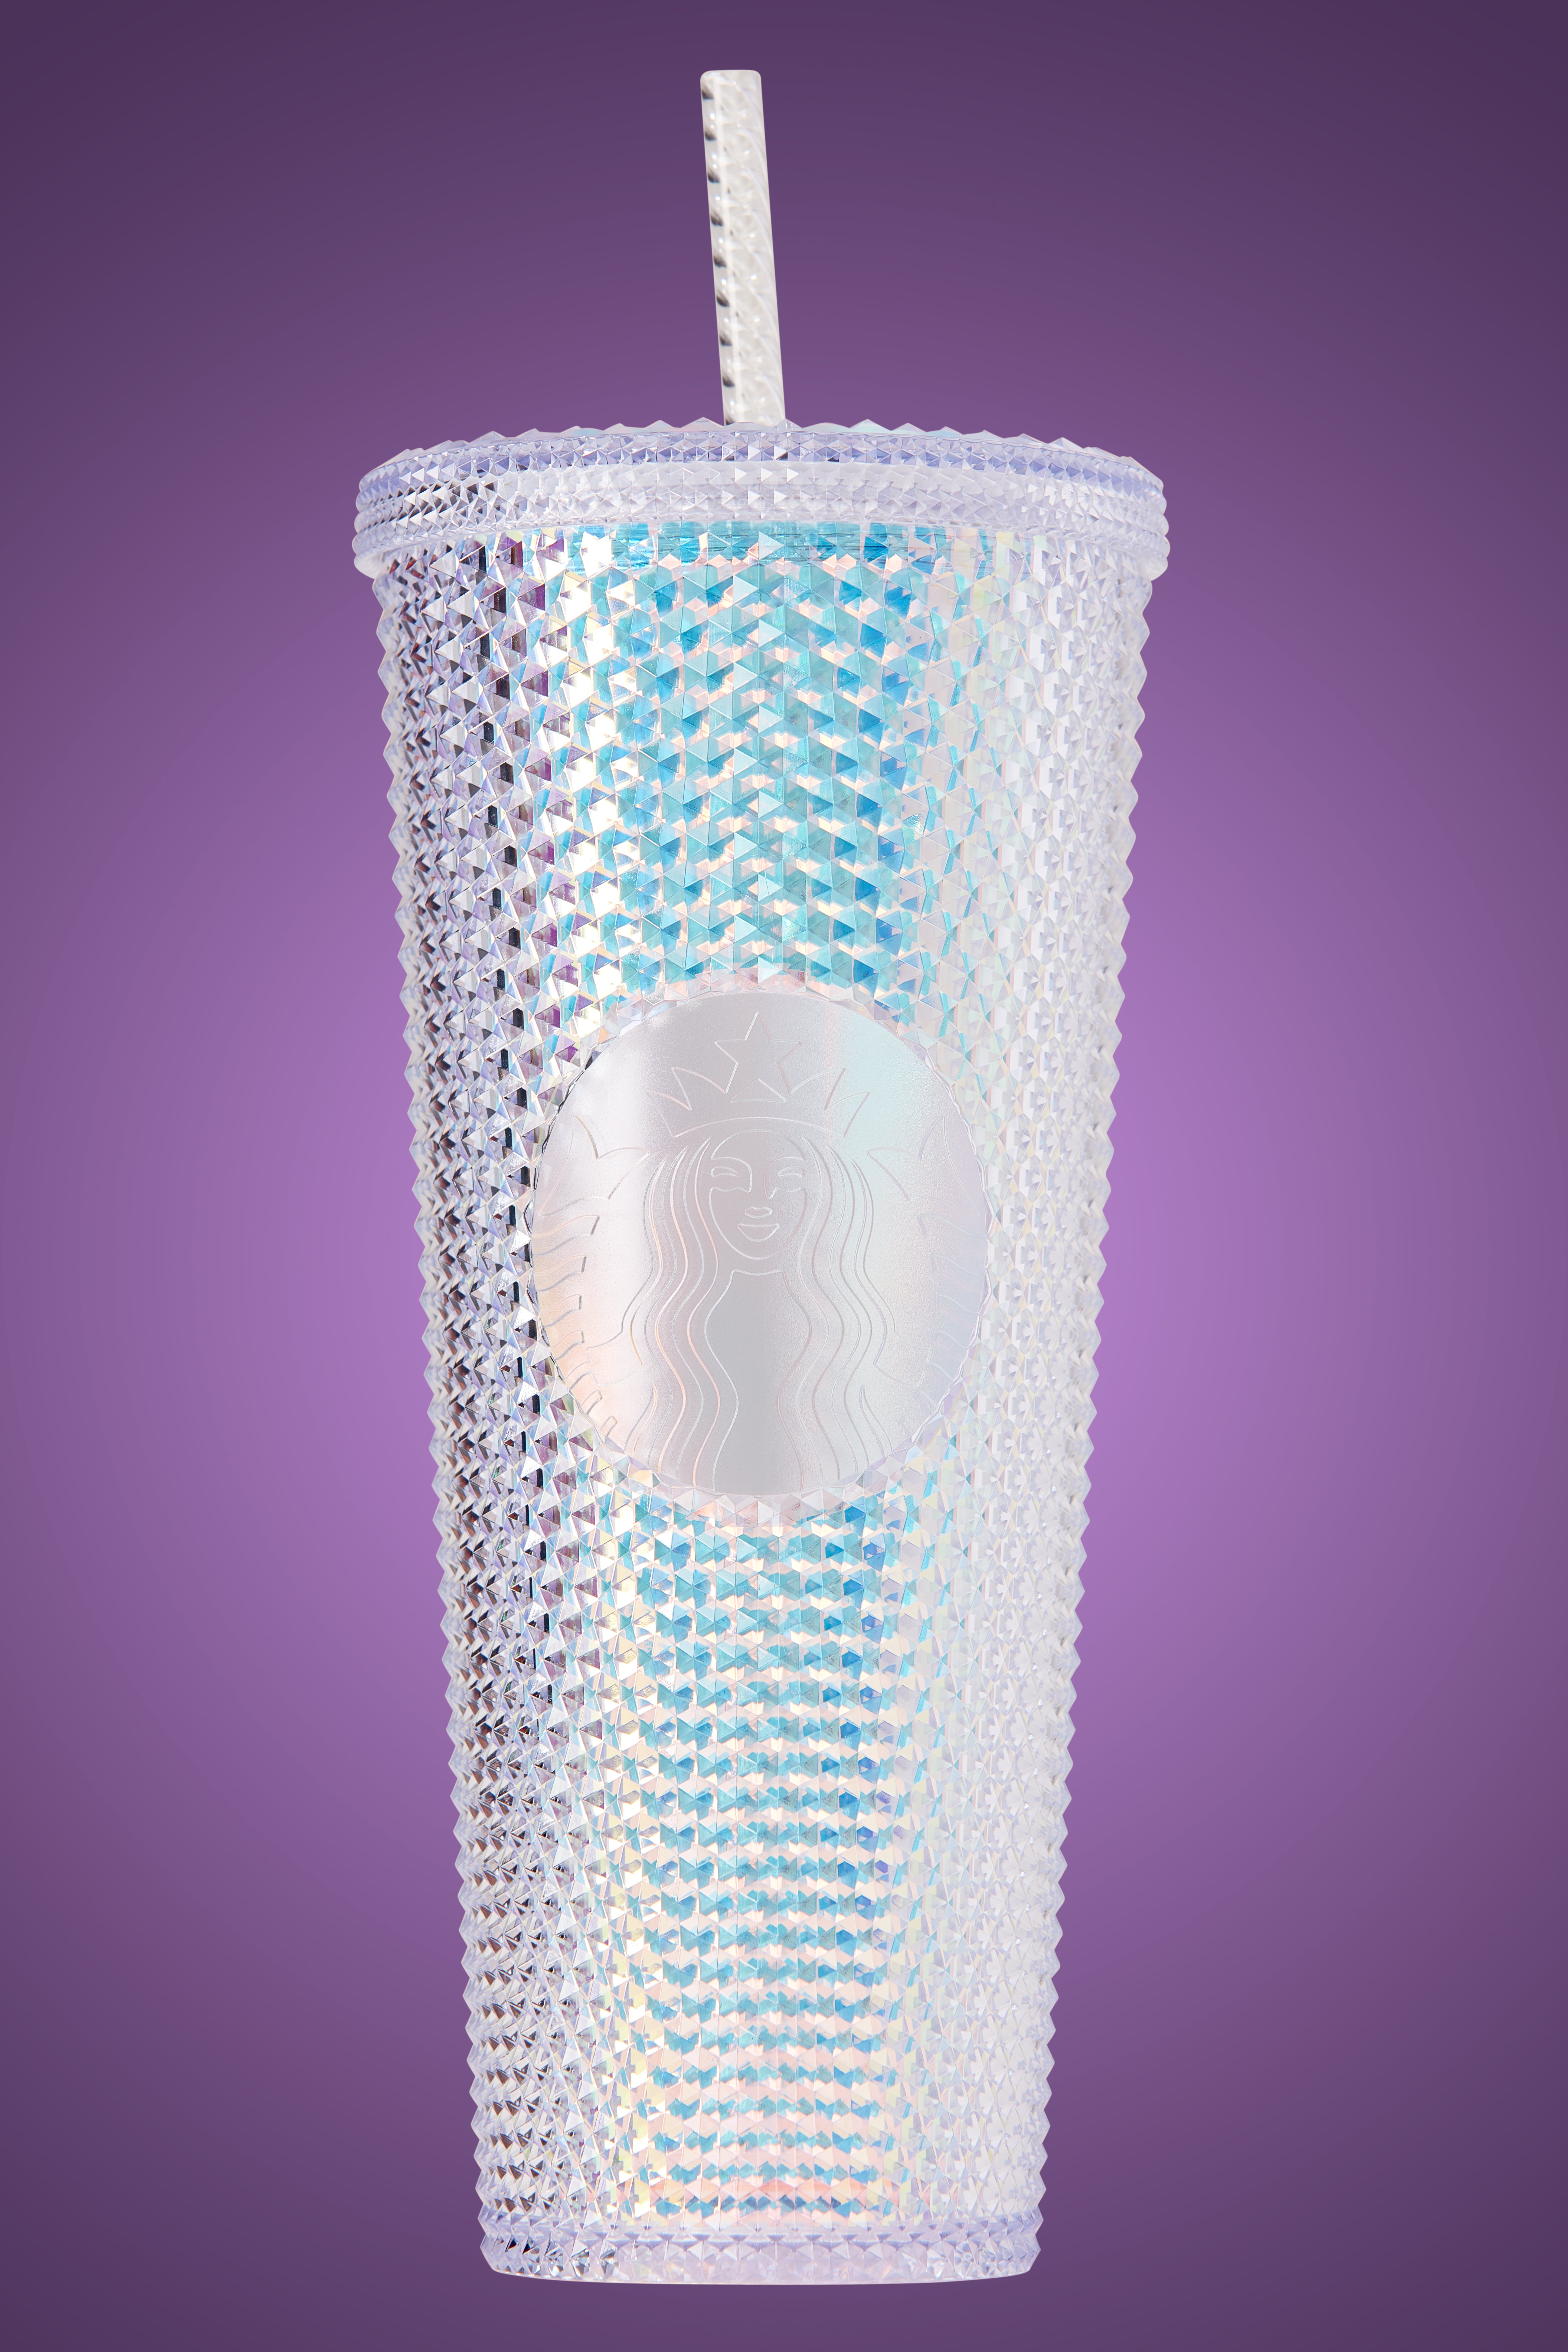 Starbucks Is Selling Iridescent Tumblers In Some Grocery Stores